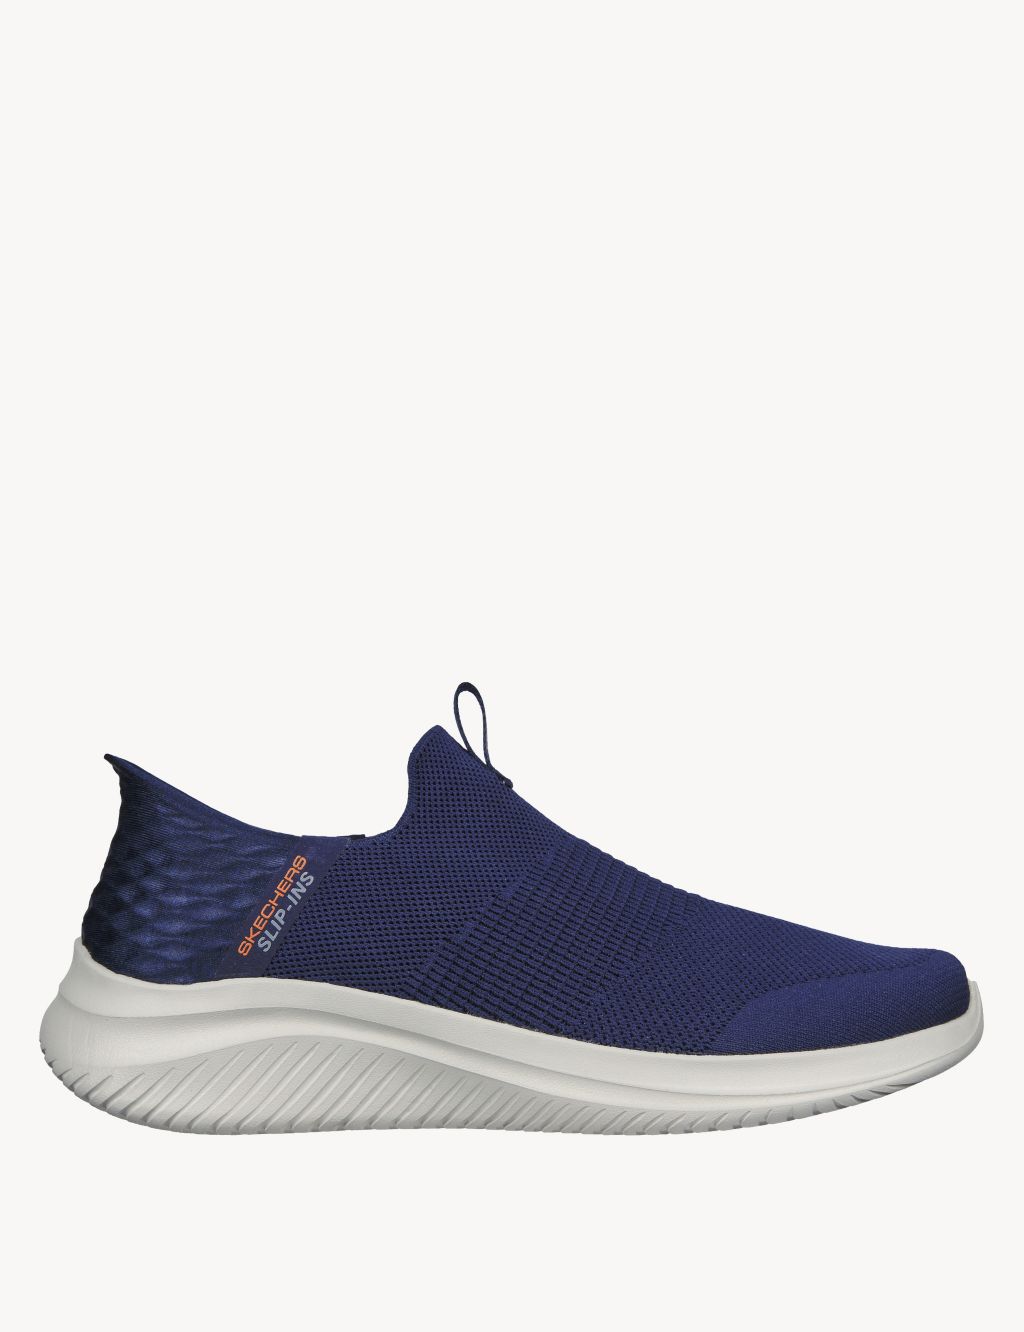 Ultra Flex 3.0 Smooth Step Wide Fit Trainers image 1